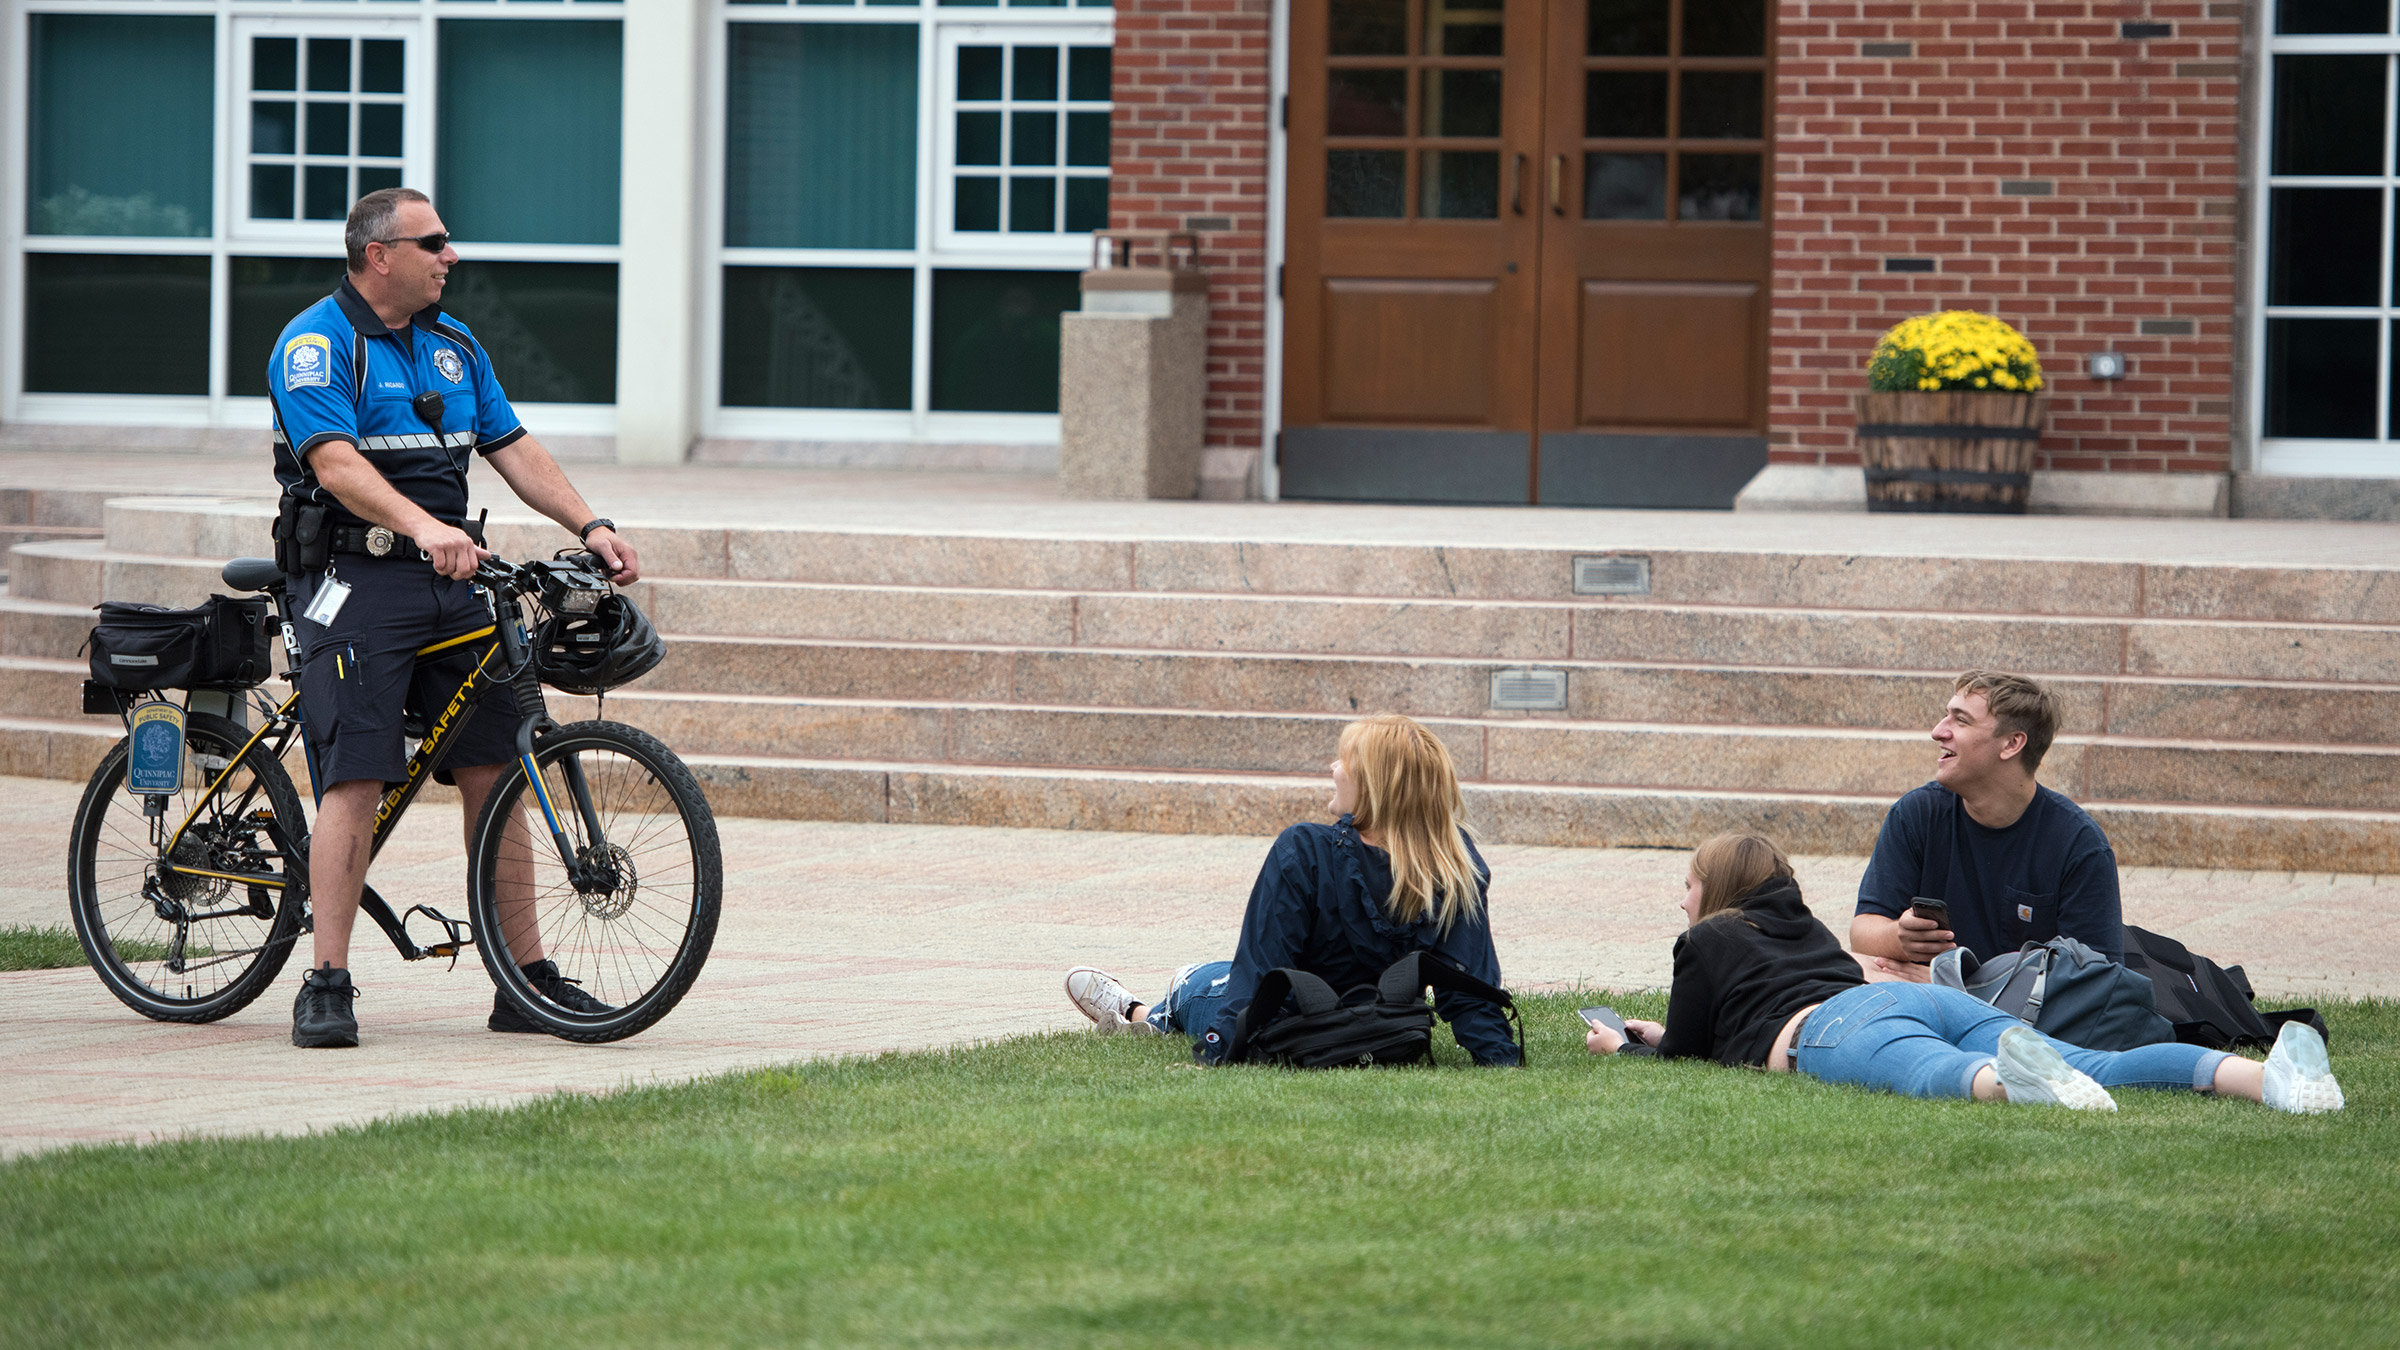 A public safety officer stands with his patrol bike and talks to students lying in the grass on the quad.